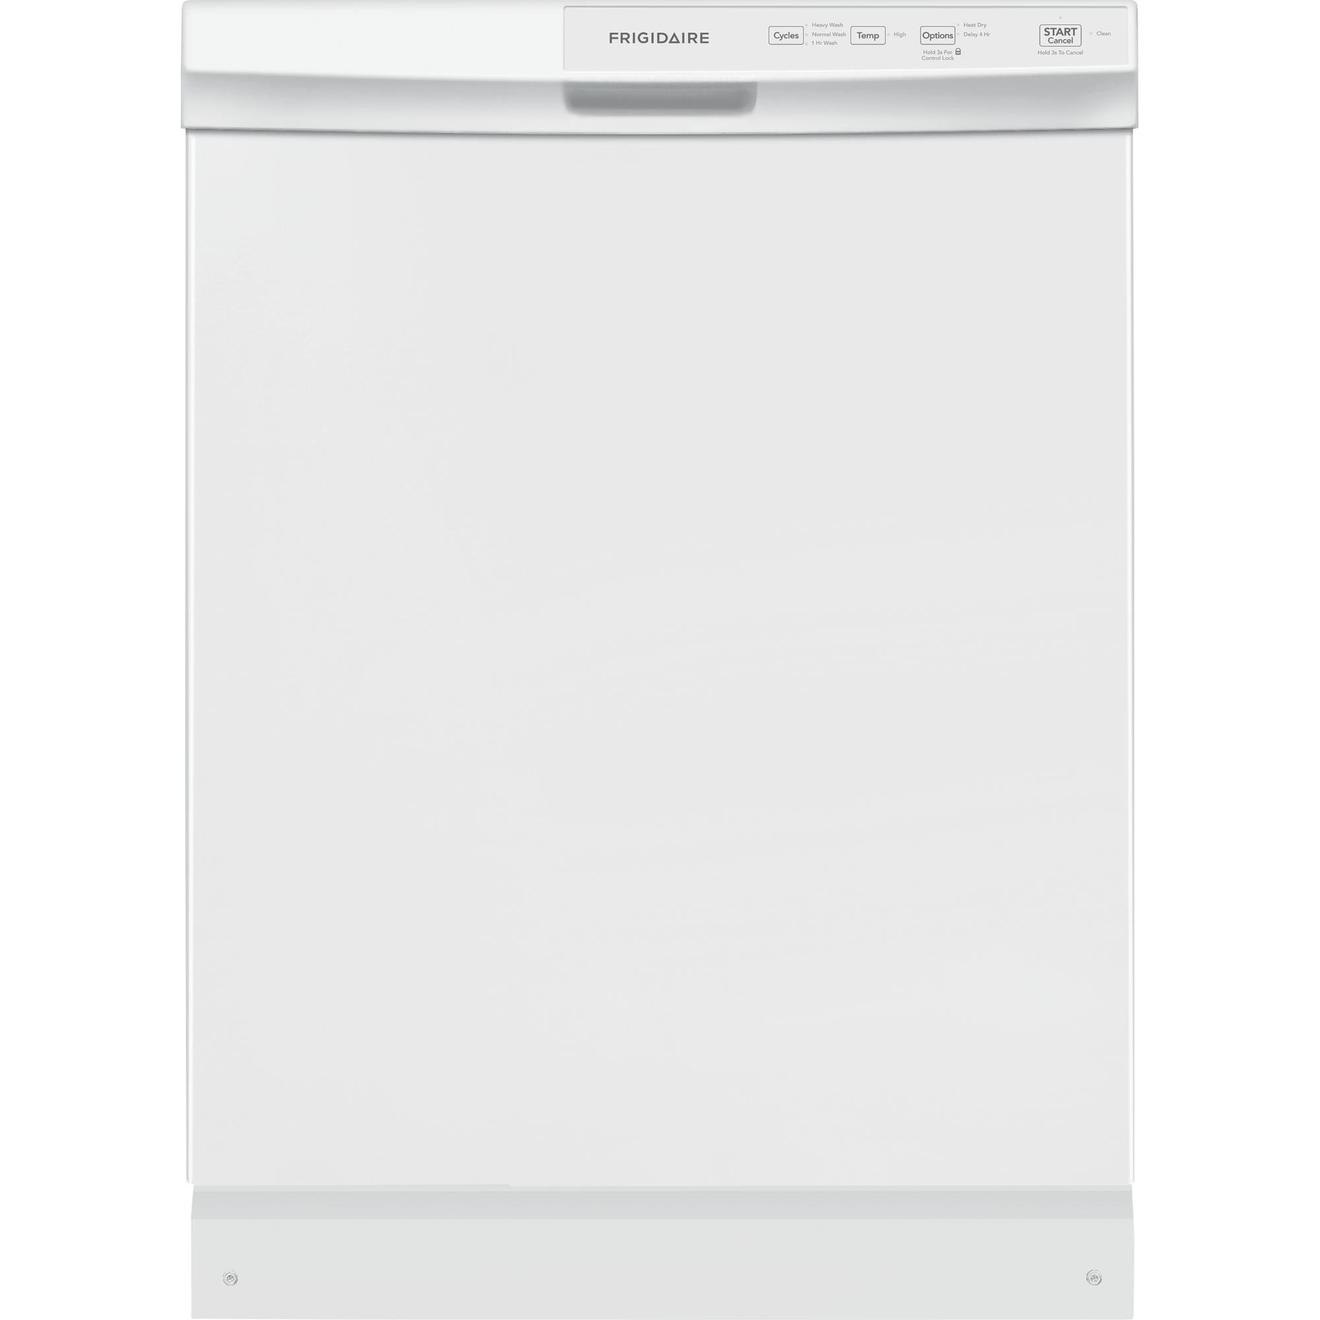 Frigidaire 3 Cycle Dishwasher with Front Controls offers at $449.98 in Trail Appliances